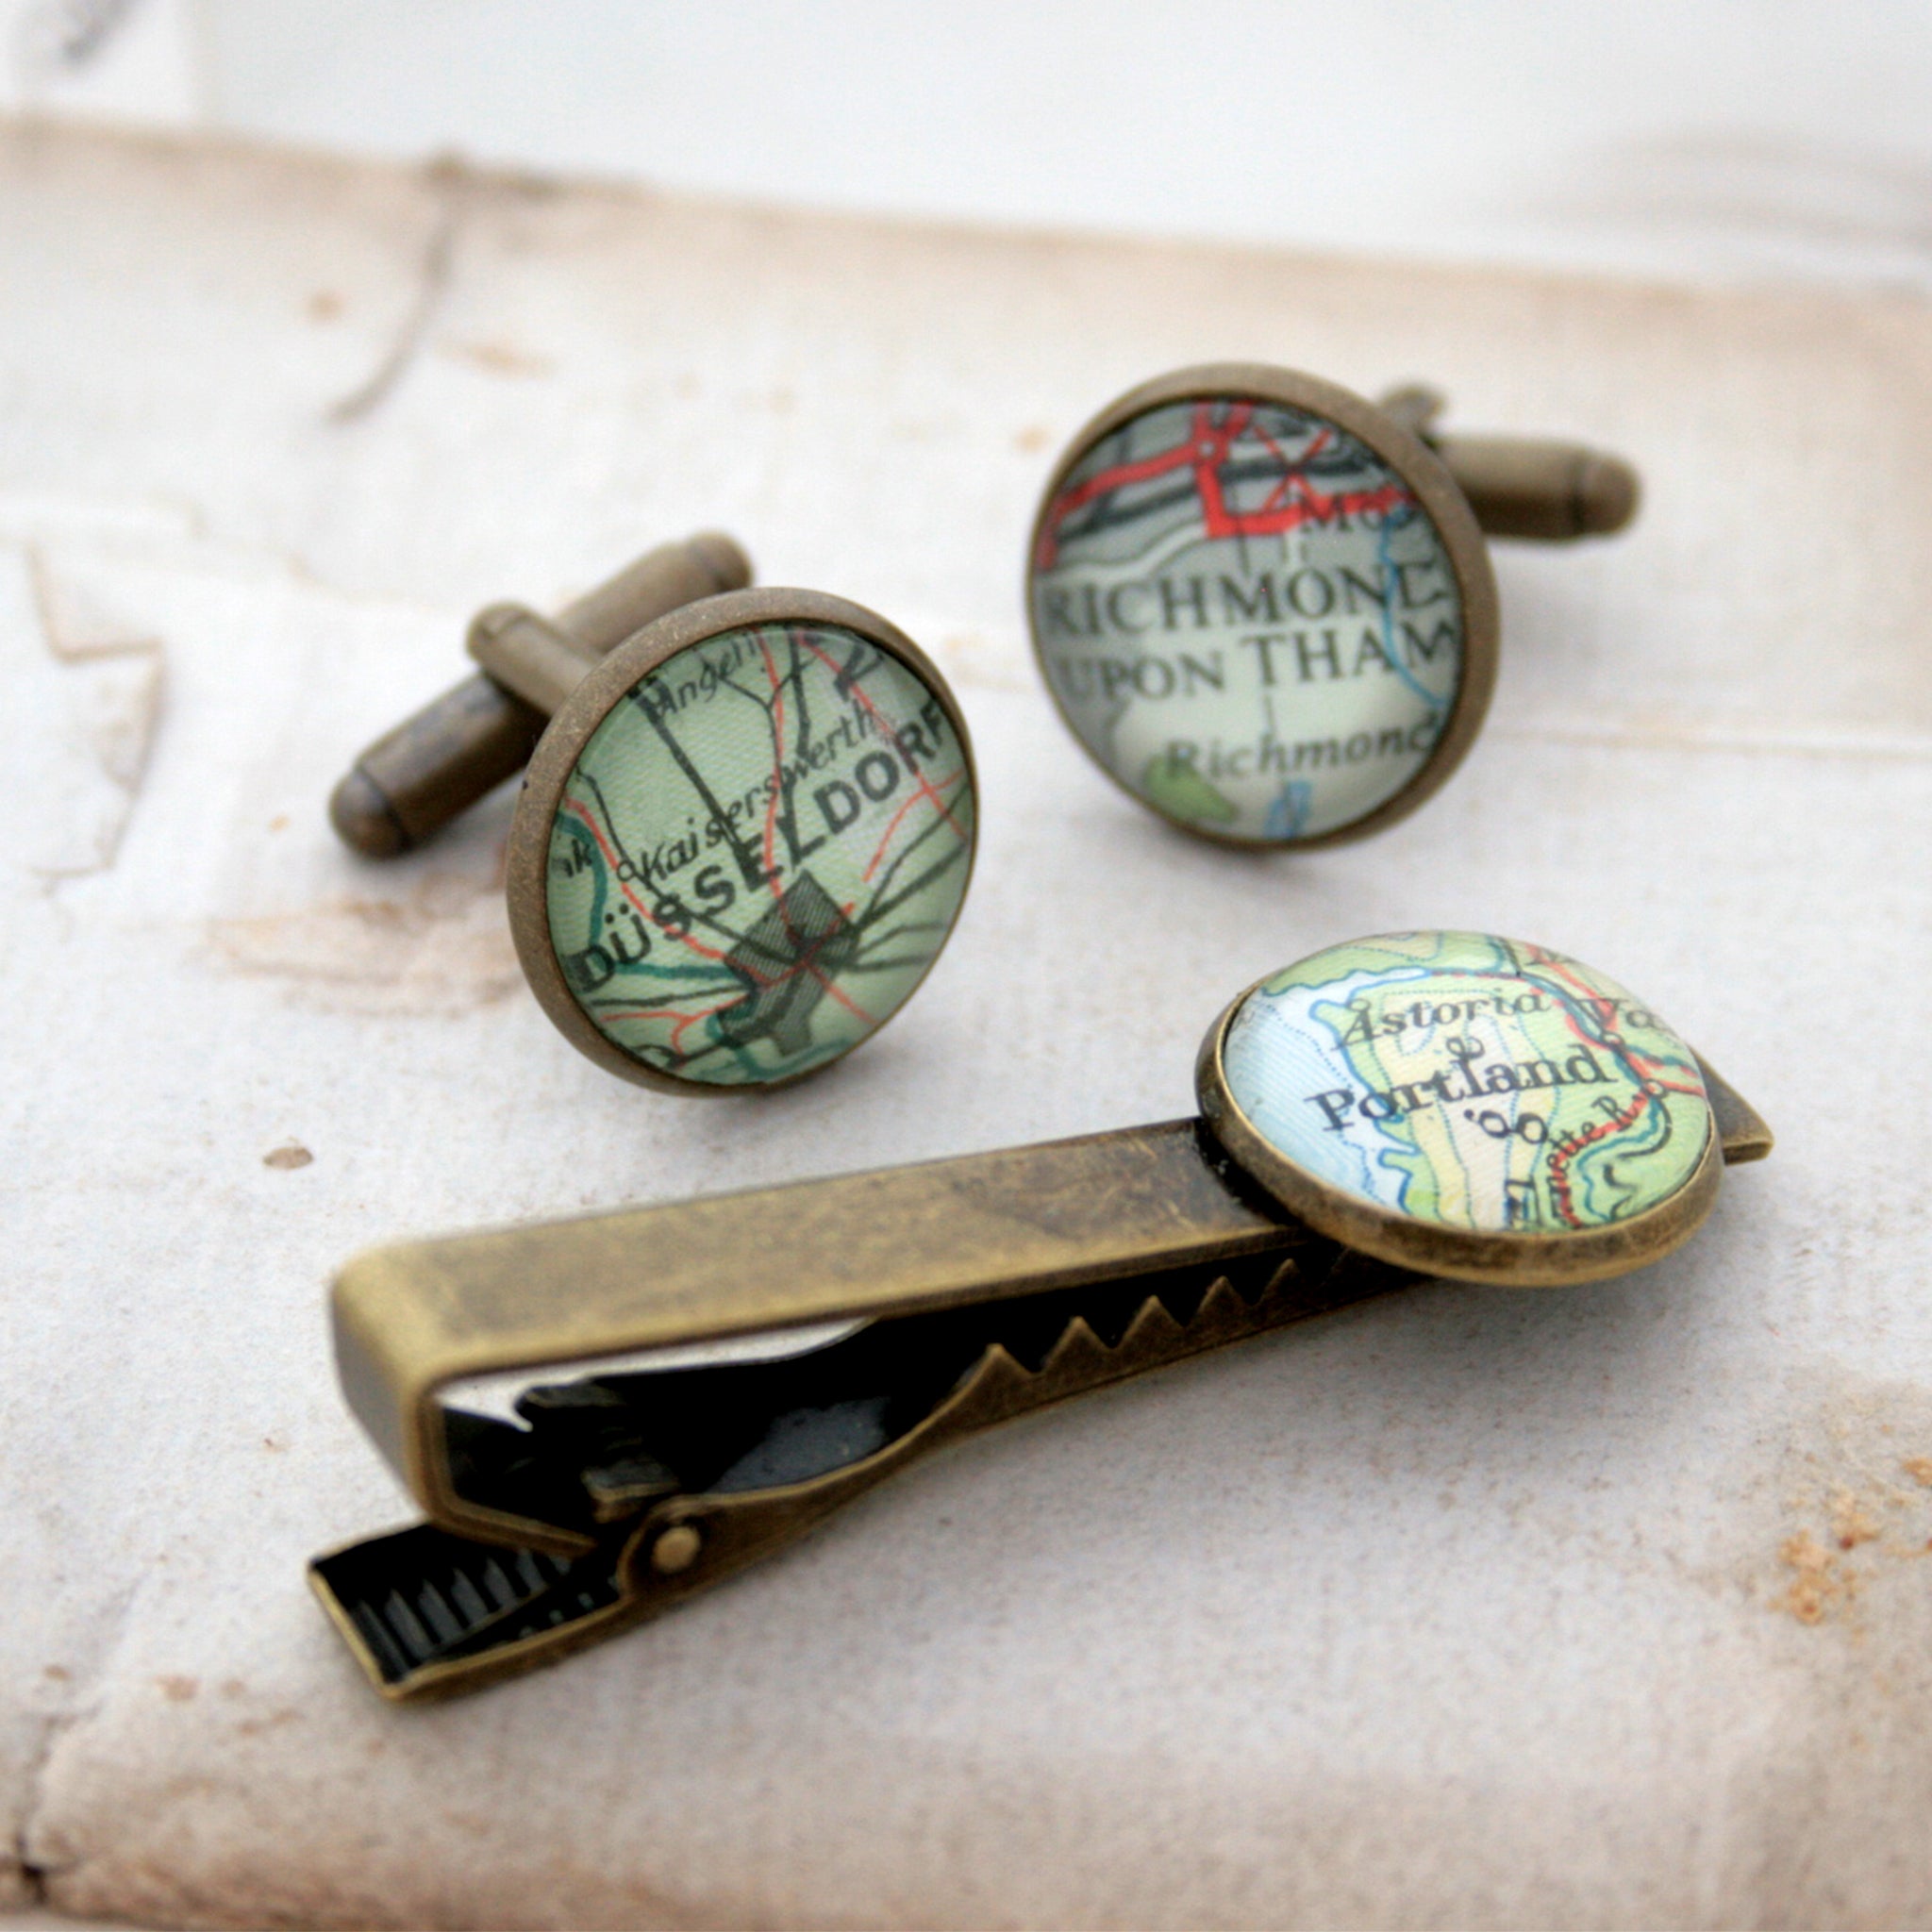 Personalised set of Tie Clip and cufflinks in bronze color featuring selection of maps